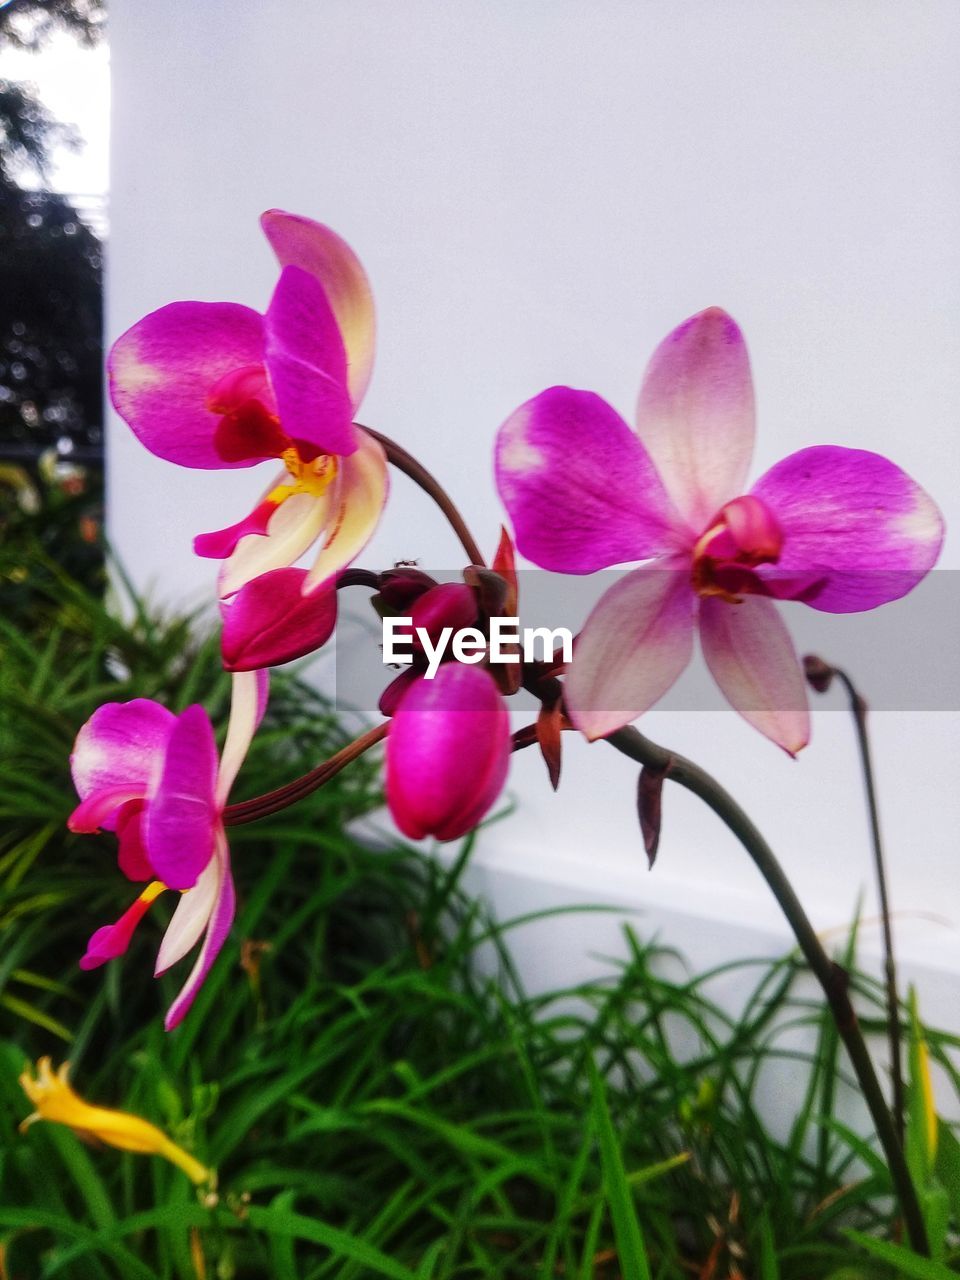 plant, flower, flowering plant, freshness, beauty in nature, pink, nature, petal, close-up, growth, fragility, orchid, flower head, inflorescence, no people, focus on foreground, springtime, outdoors, purple, blossom, magenta, day, grass, botany, tree